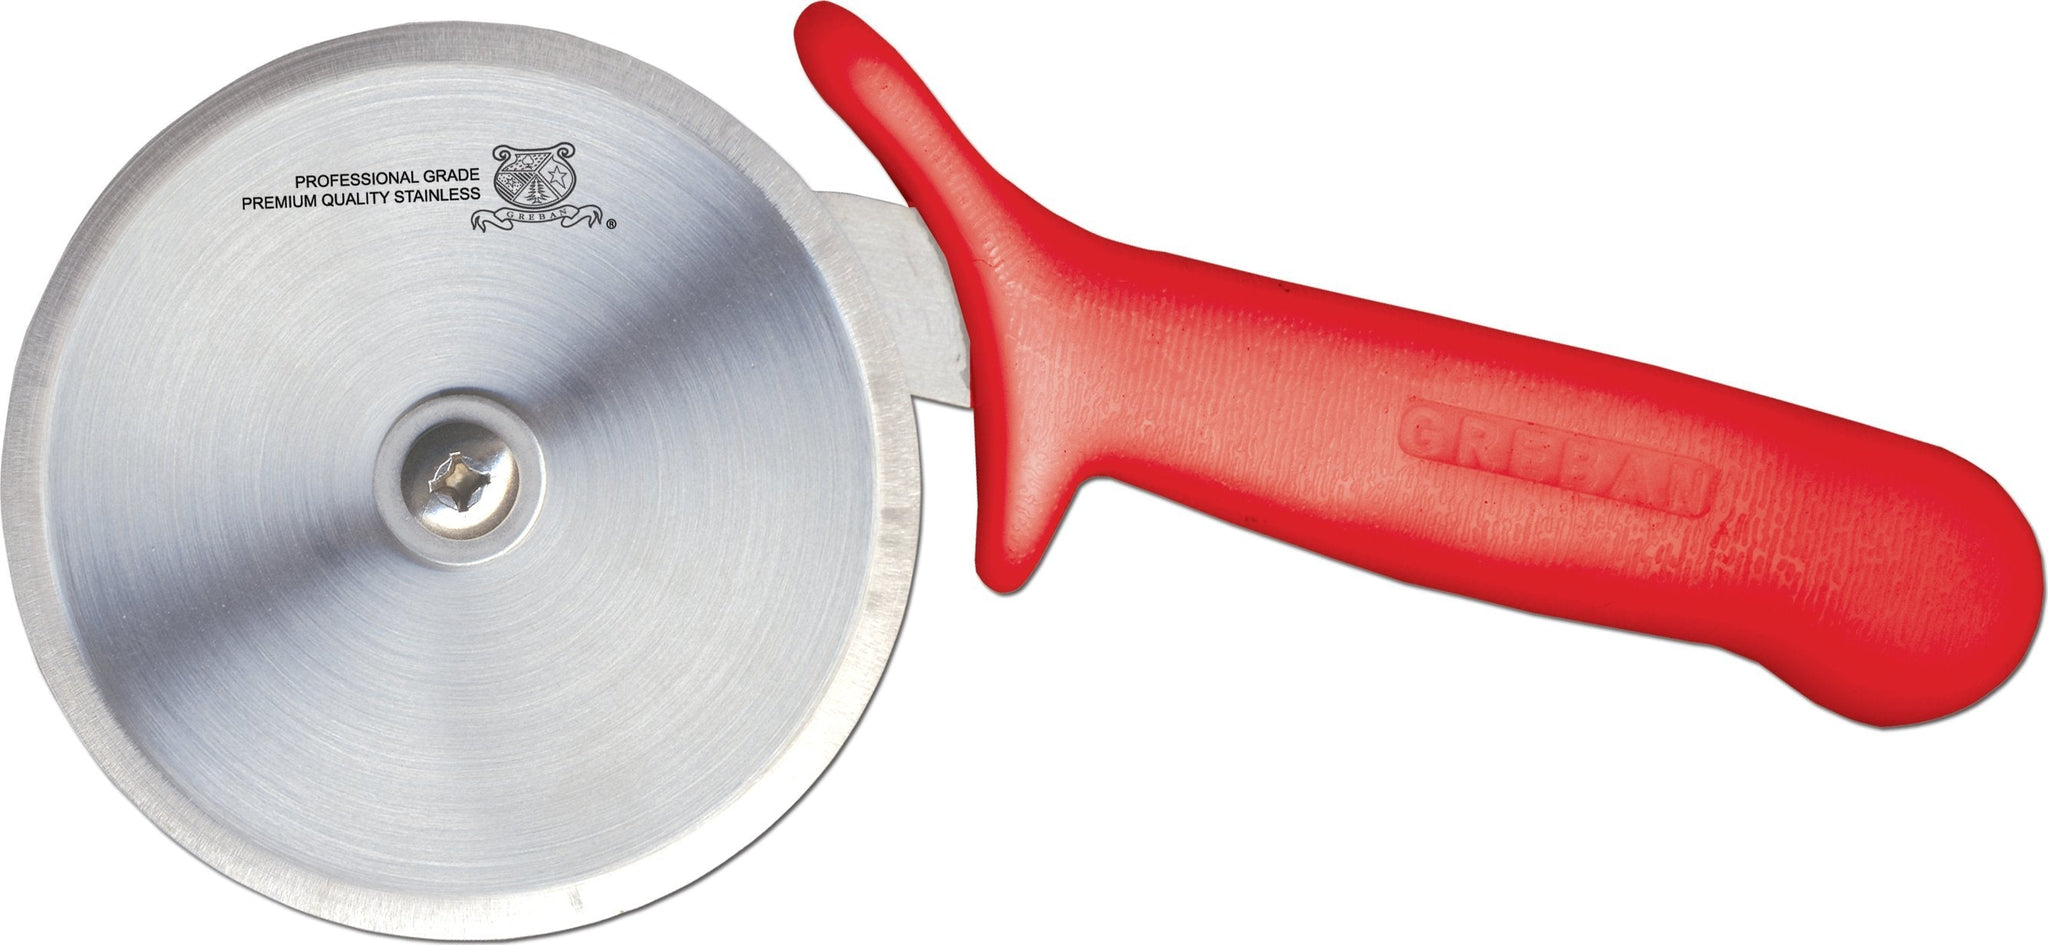 Omcan - 4” R-Style Pizza Cutter with Red Handle, 10/cs - 12813